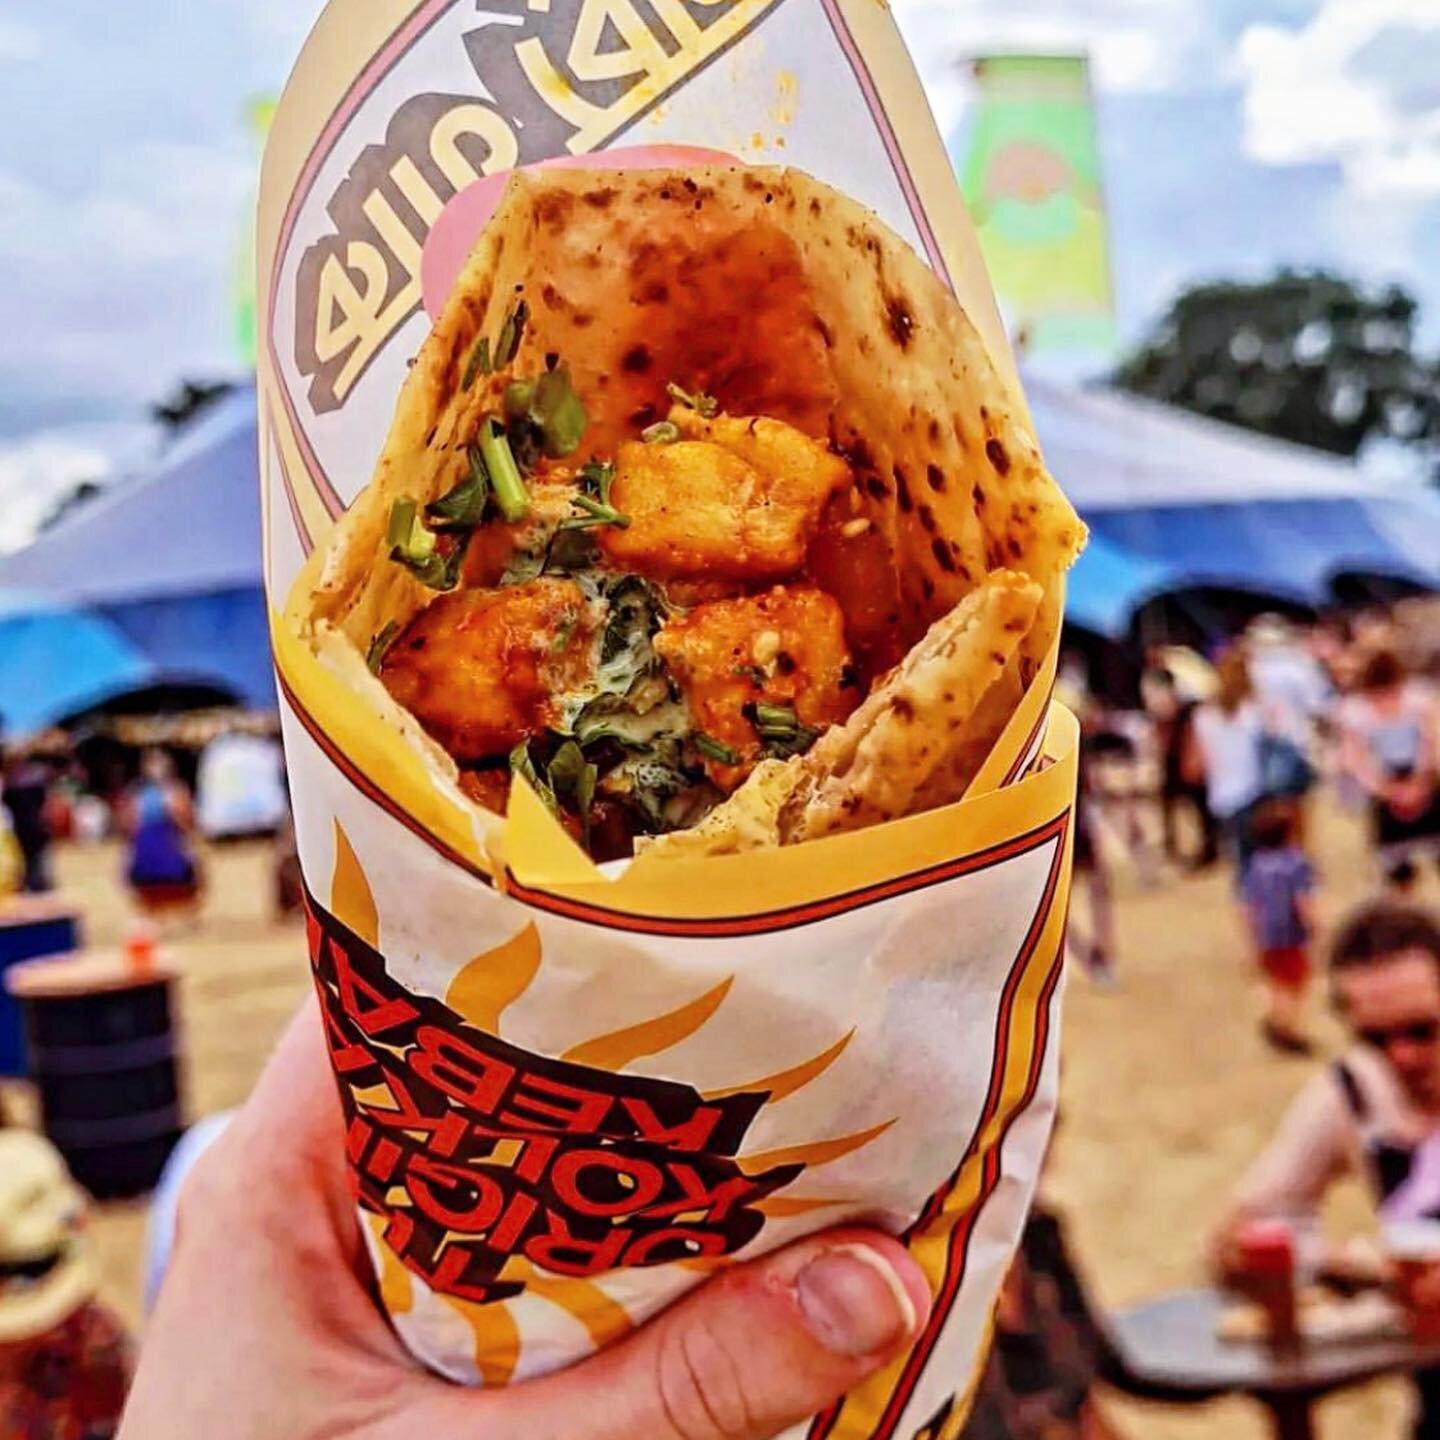 WOMAD you were a blast ‼️
Thanks for the food love, return customers, fun neighbours @hanoikitchen @makatcha_eats and for enough data to just about watch England win the Euros 🙌